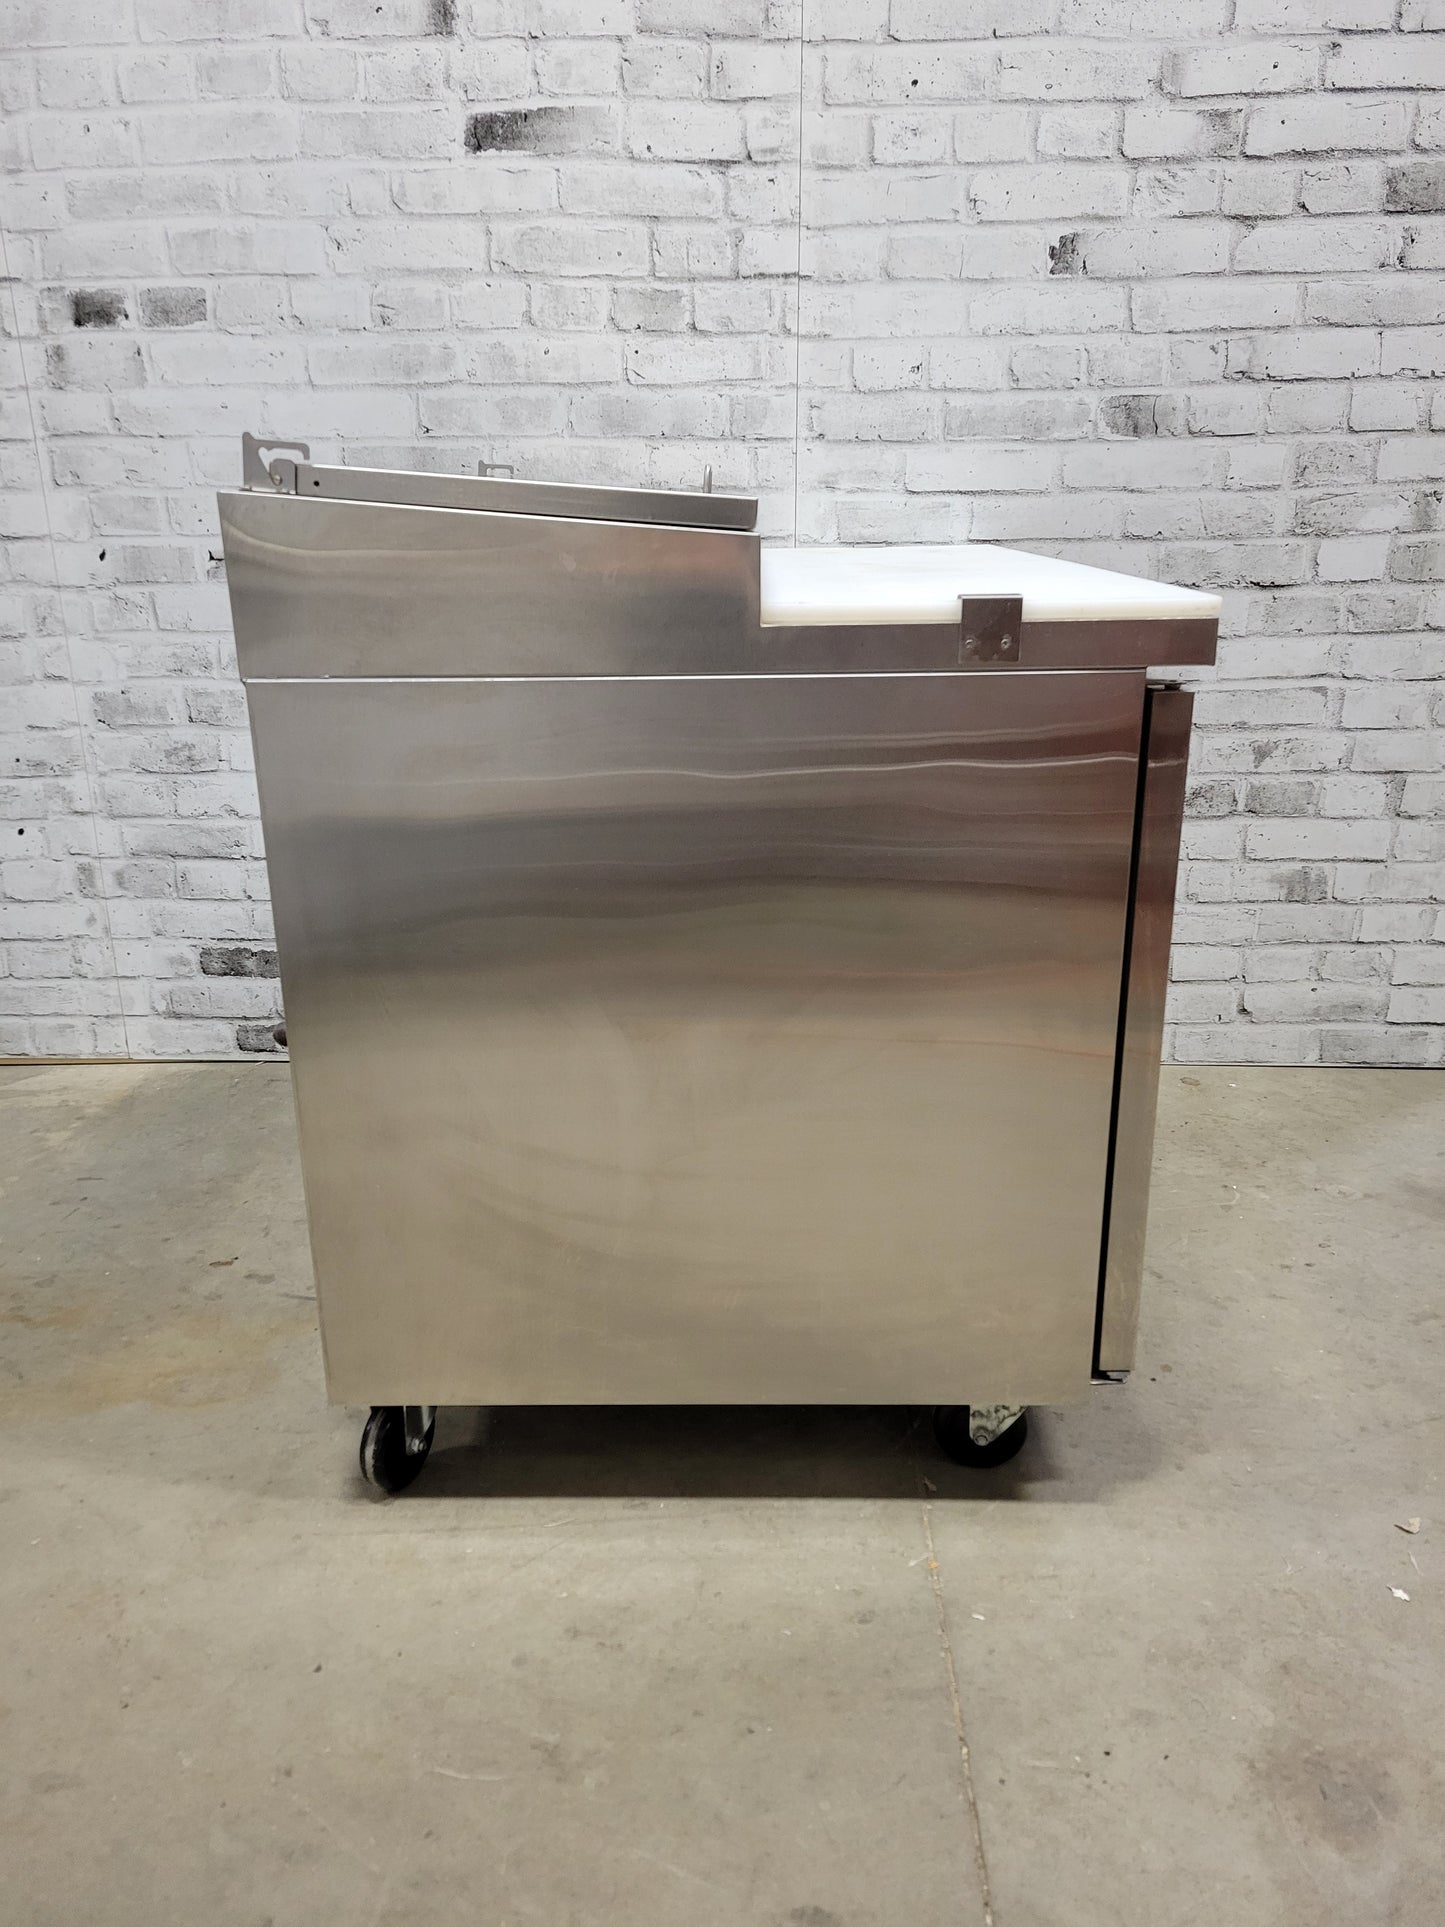 MRE 48” Stainless Pizza Prep Cooler